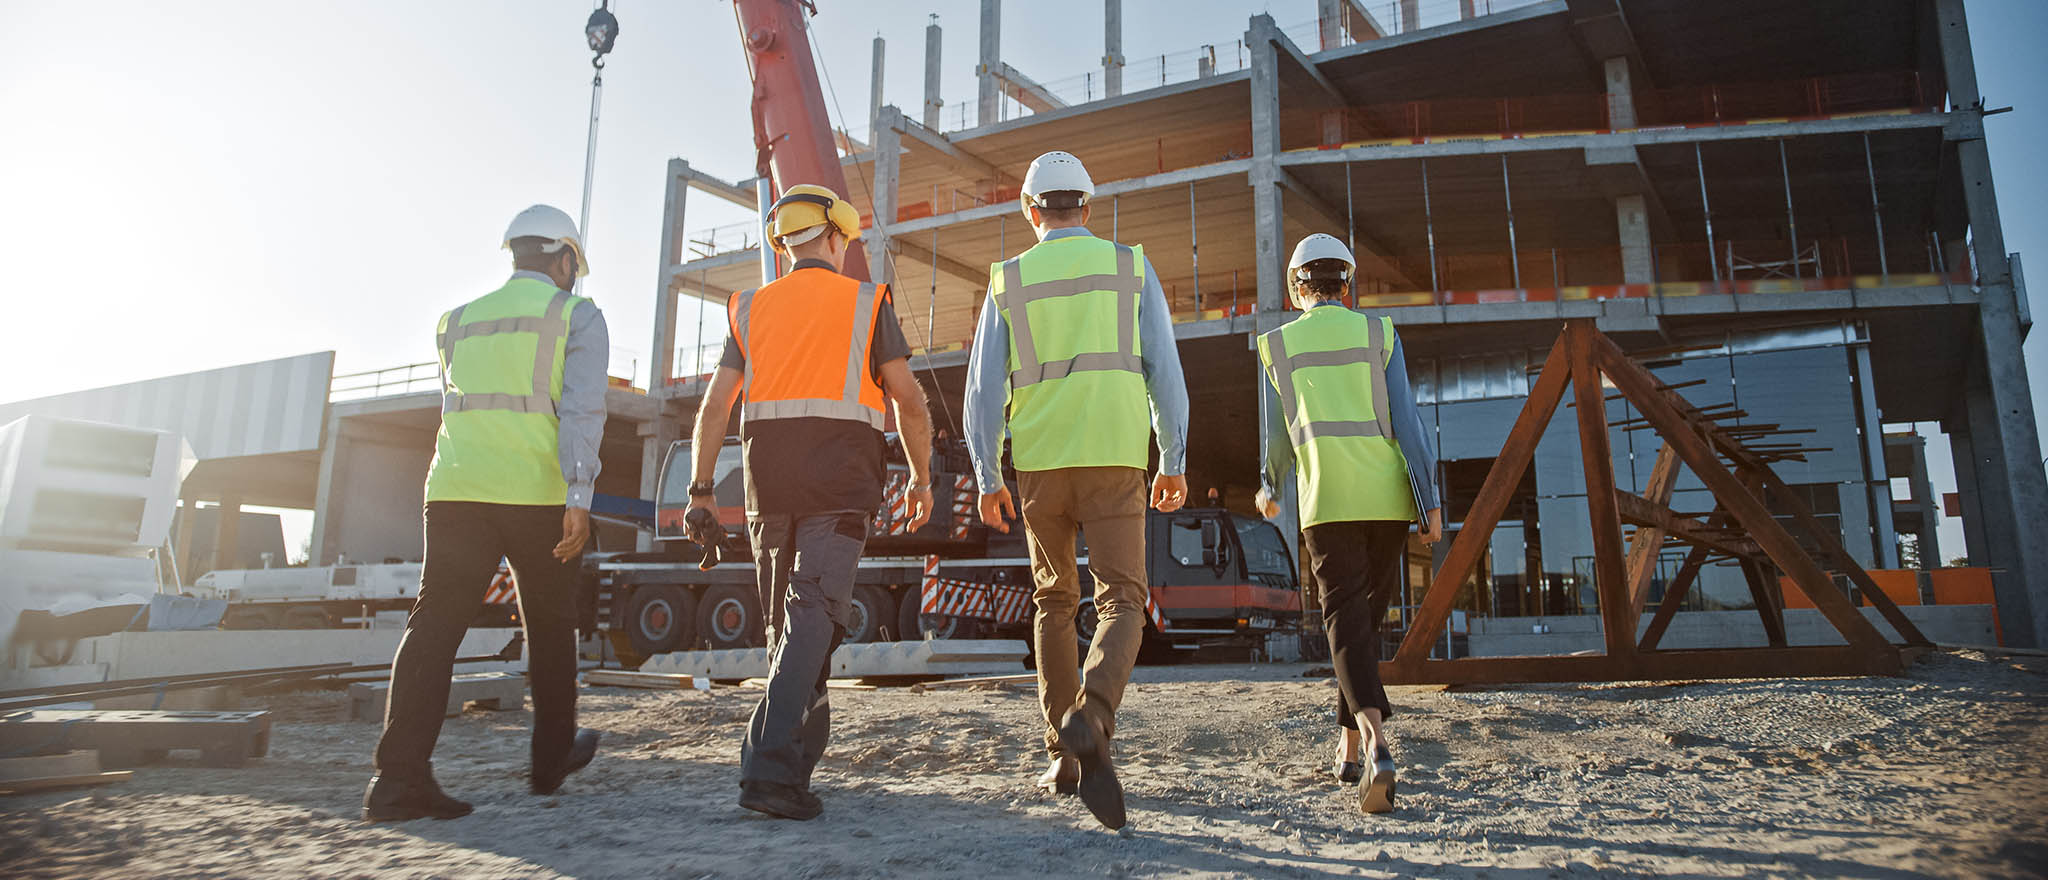 Four workers walking on a property development site